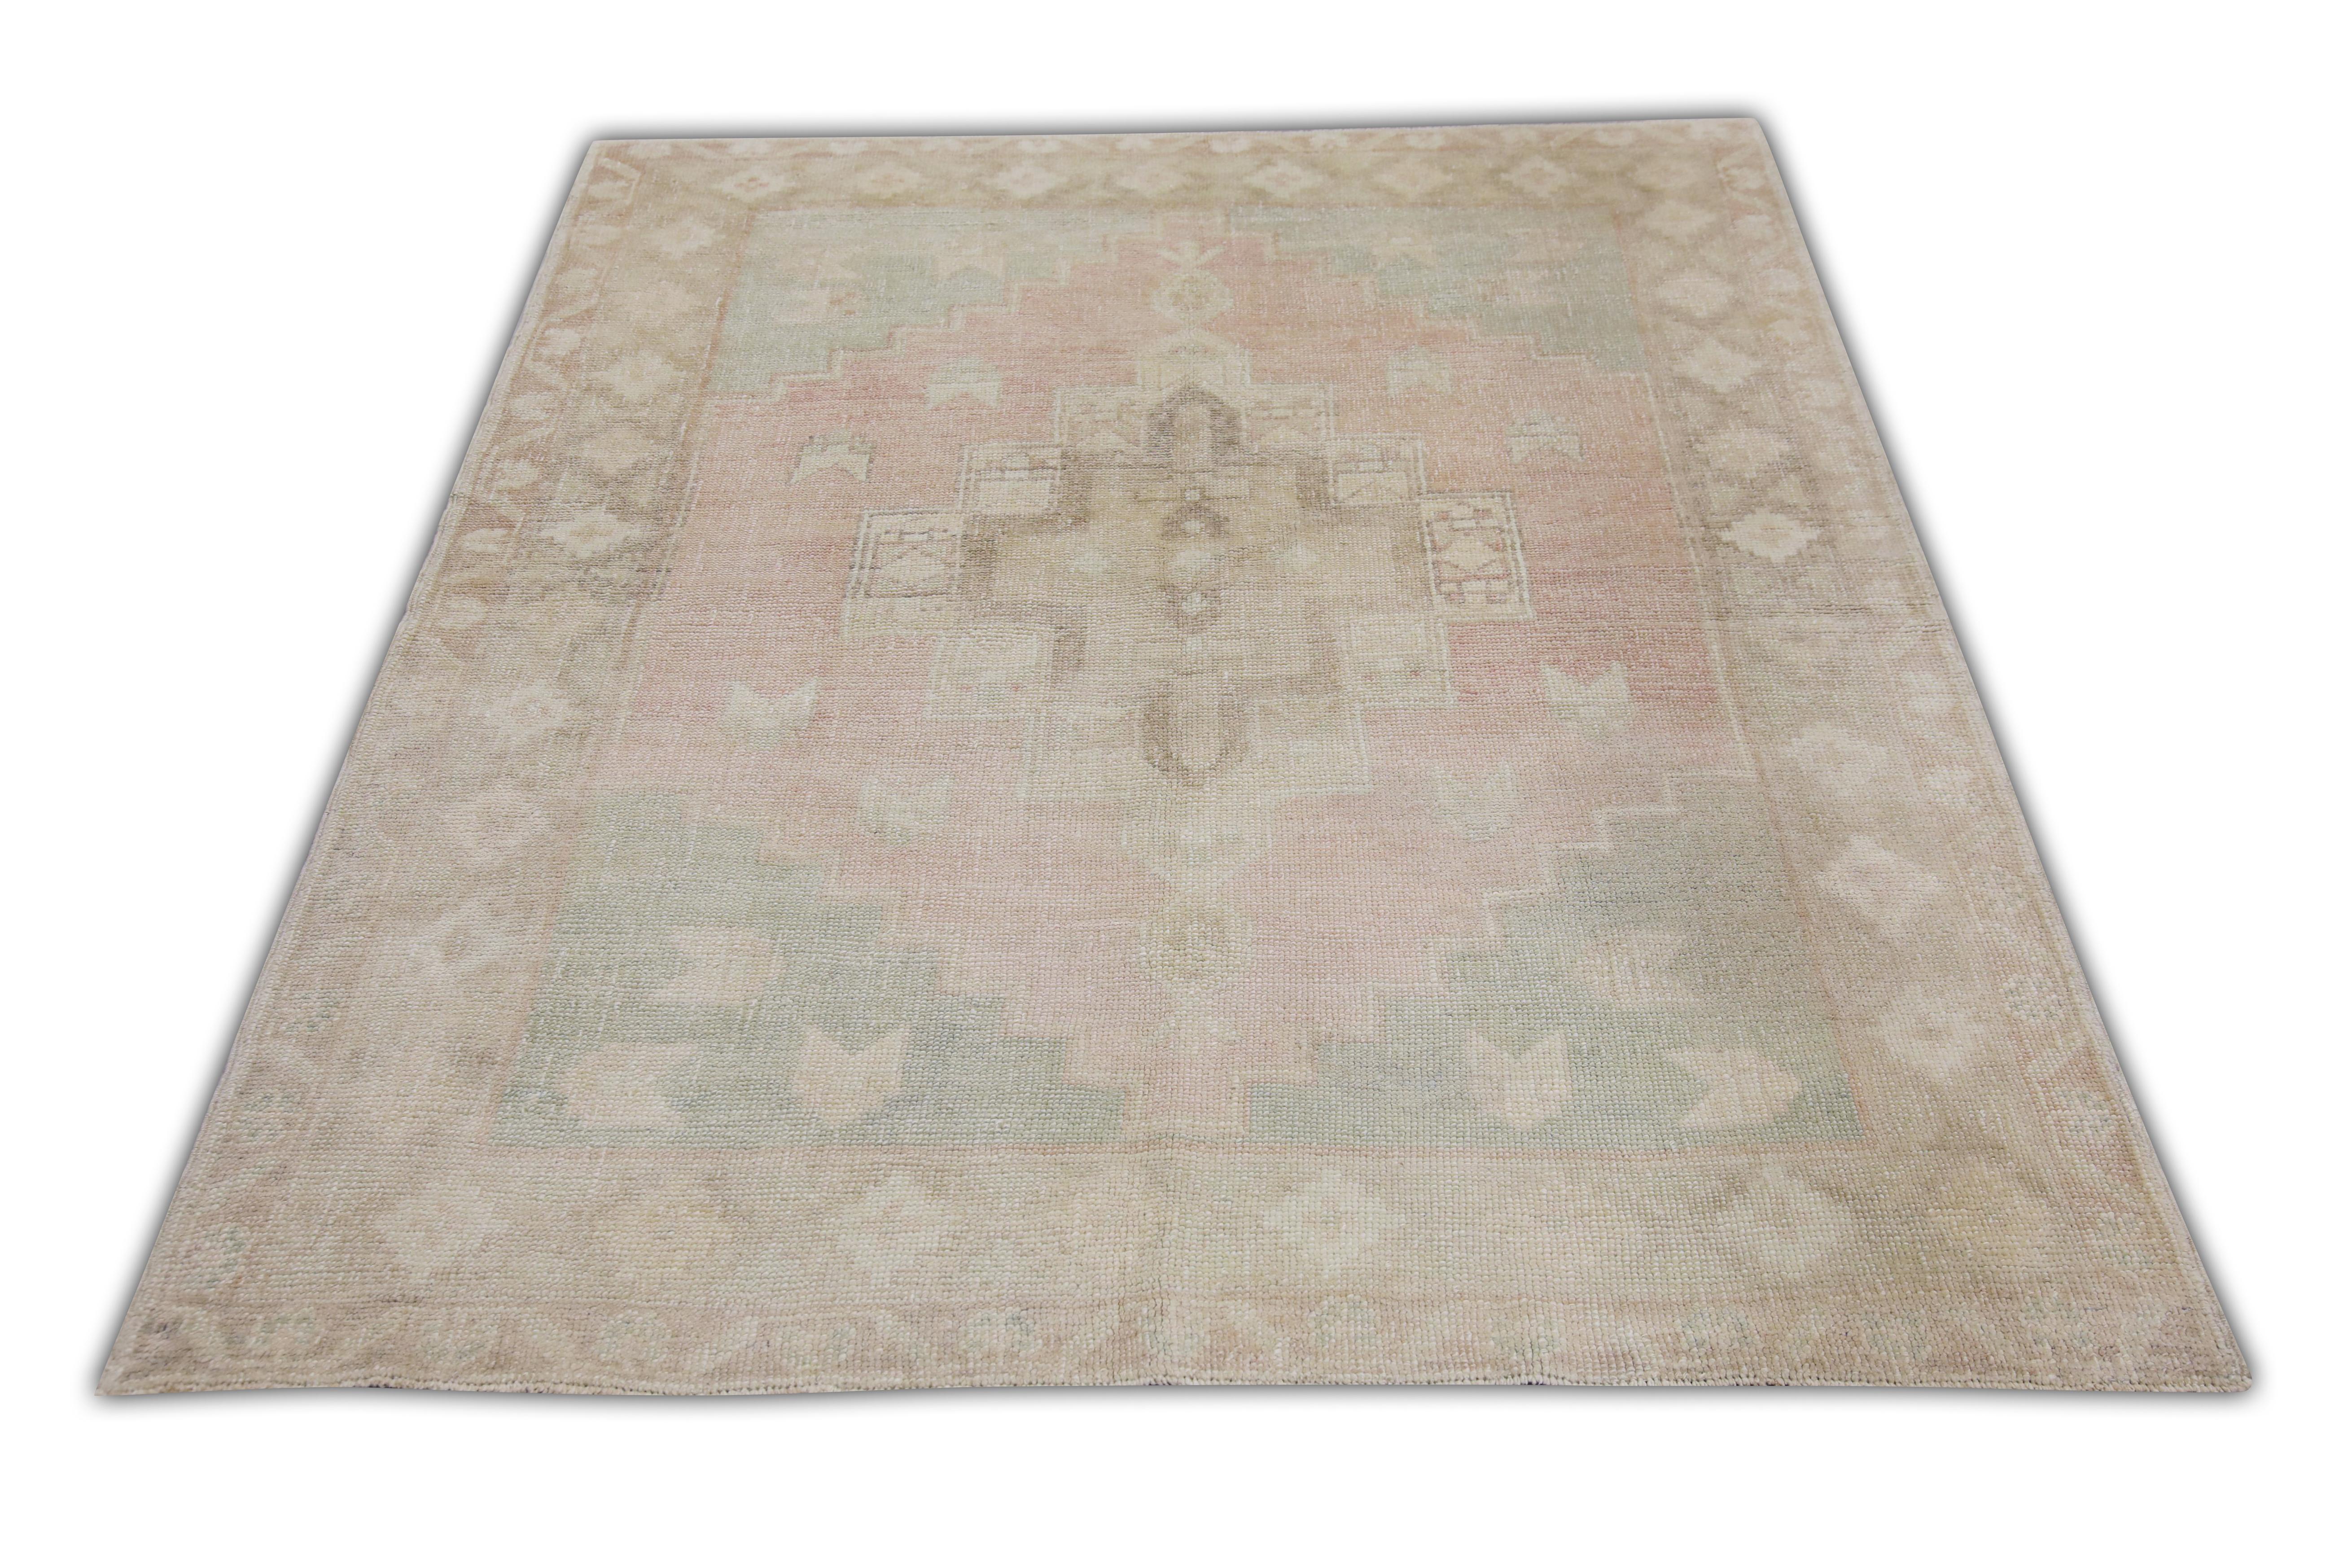 Introducing a one-of-a-kind vintage Turkish hand-knotted wool rug, carefully crafted by skilled artisans using traditional techniques passed down through generations. This exquisite rug boasts a stunning array of natural dyes, resulting in a rich